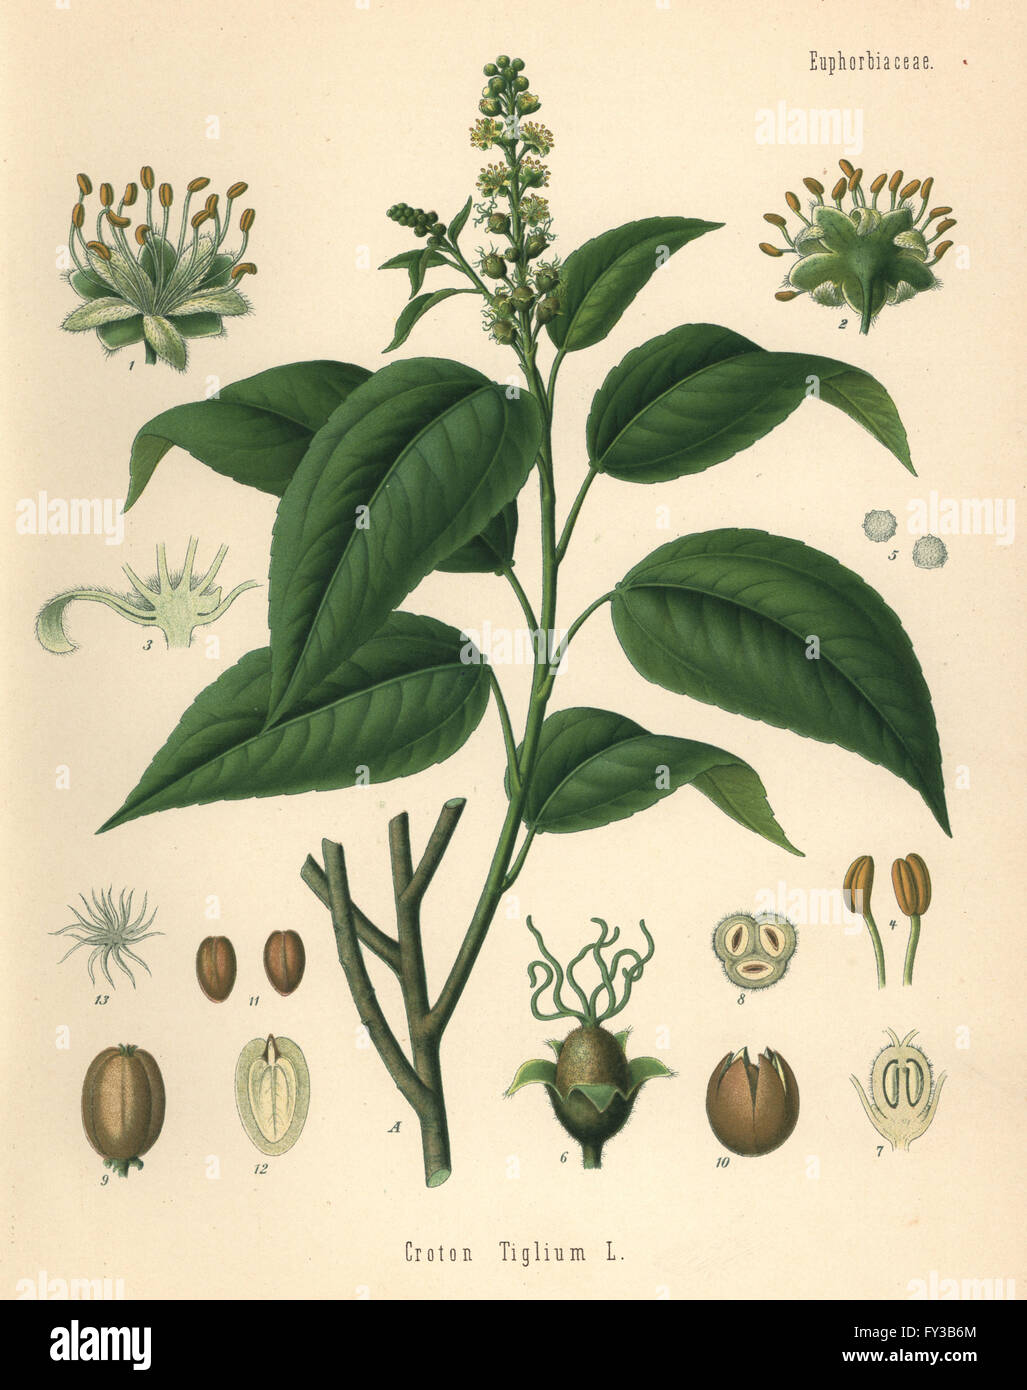 Purging croton, Croton tiglium. Chromolithograph after a botanical illustration from Hermann Adolph Koehler's Medicinal Plants, edited by Gustav Pabst, Koehler, Germany, 1887. Stock Photo